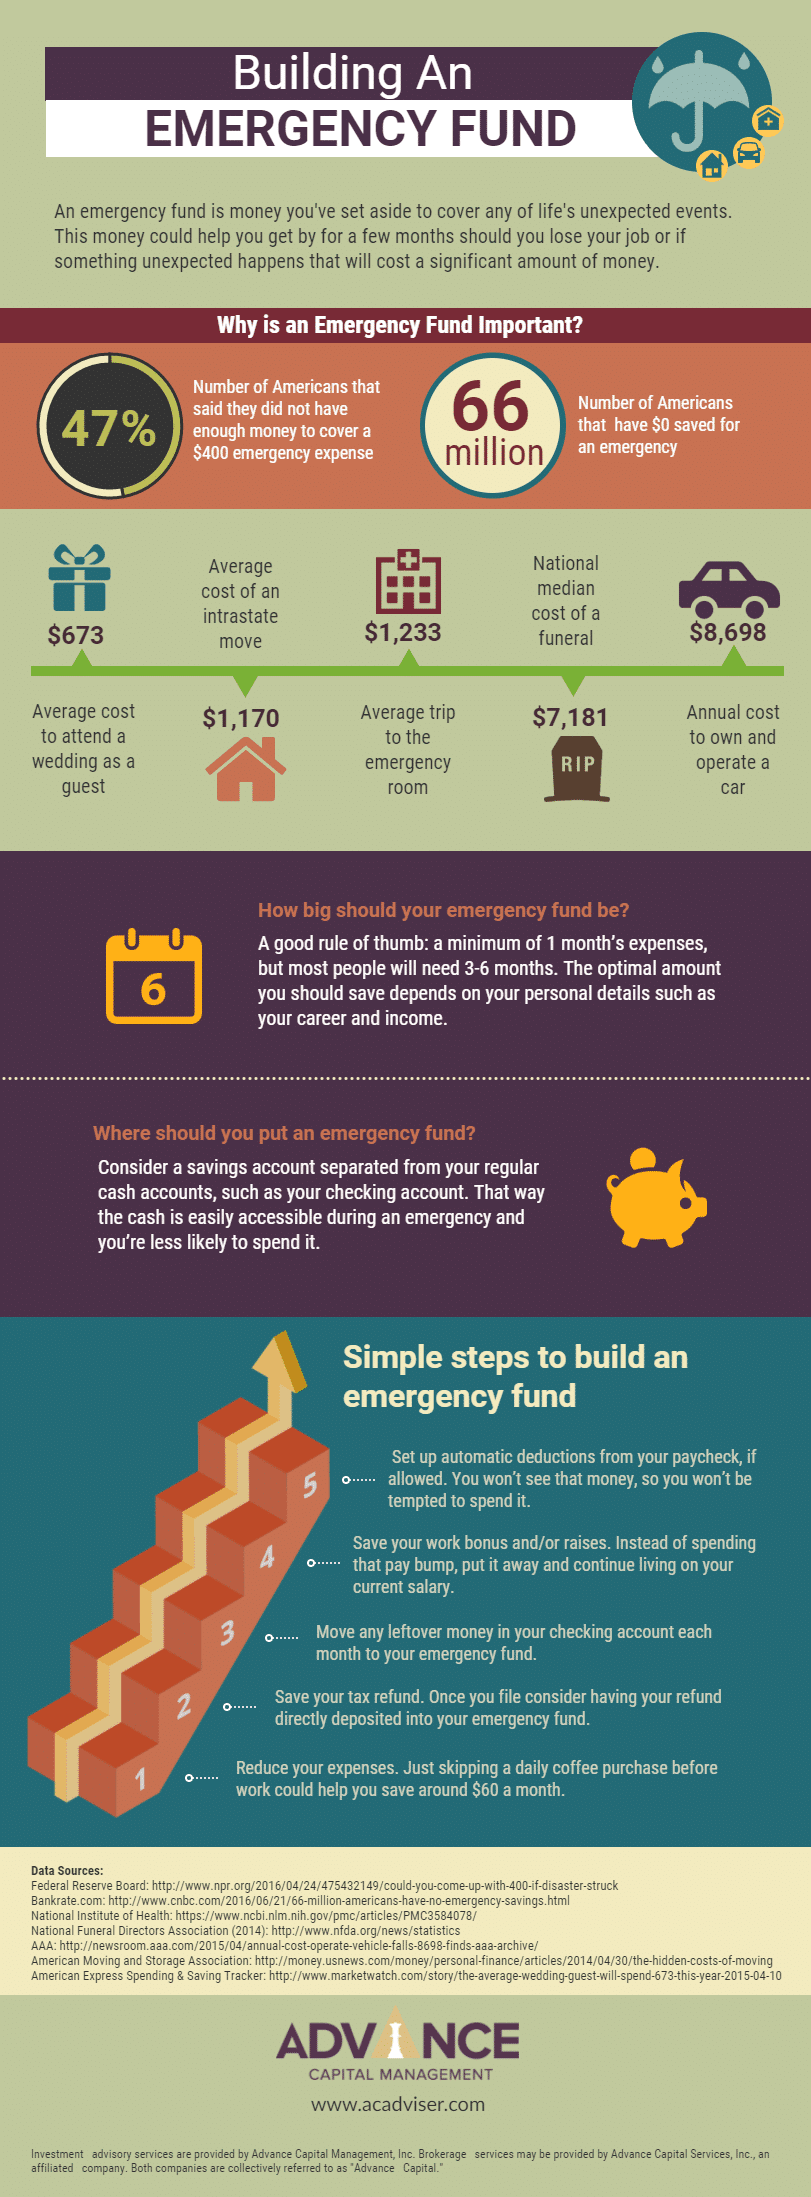 A Quick Guide to Building an Emergency Fund.png